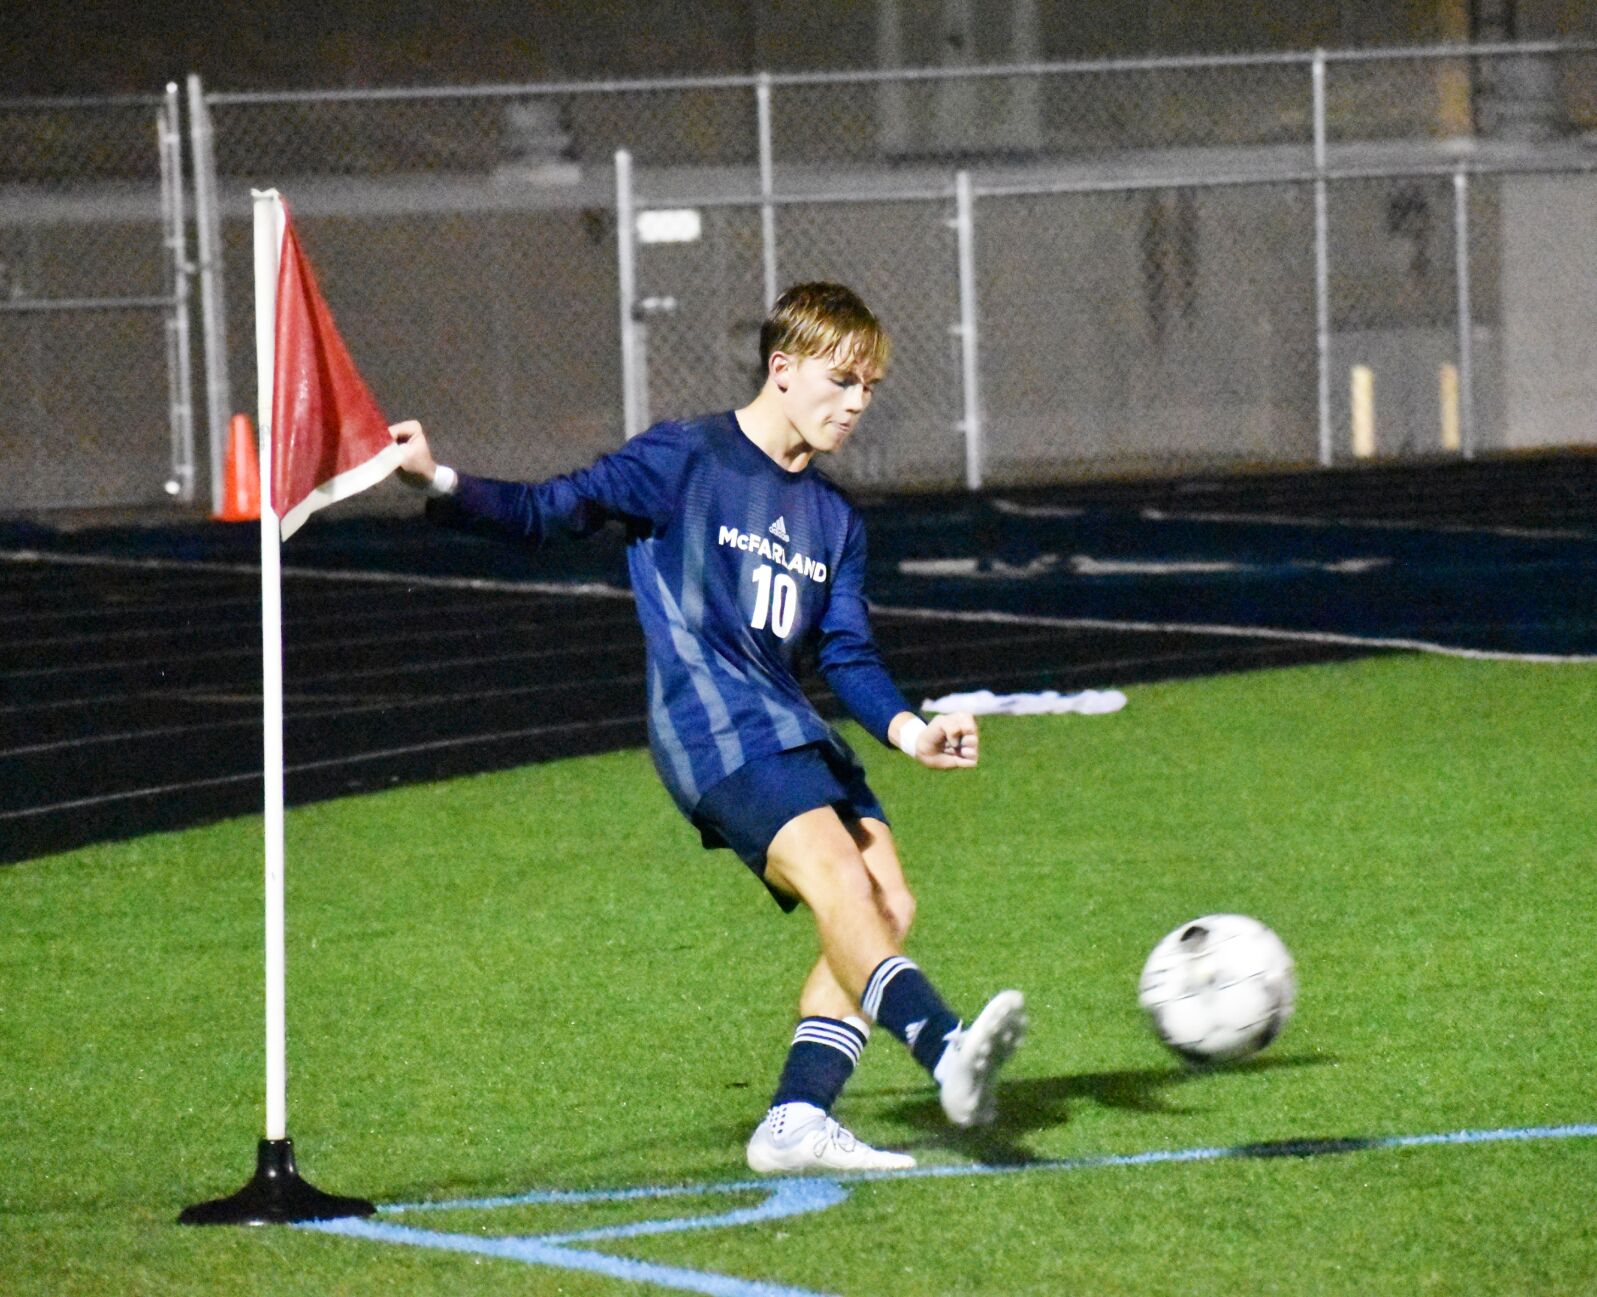 McFarland boys soccer: Ty Sampson and Cole Willems earn first team all-conference honors, Niko Dabetic and Cole Larsen take second team